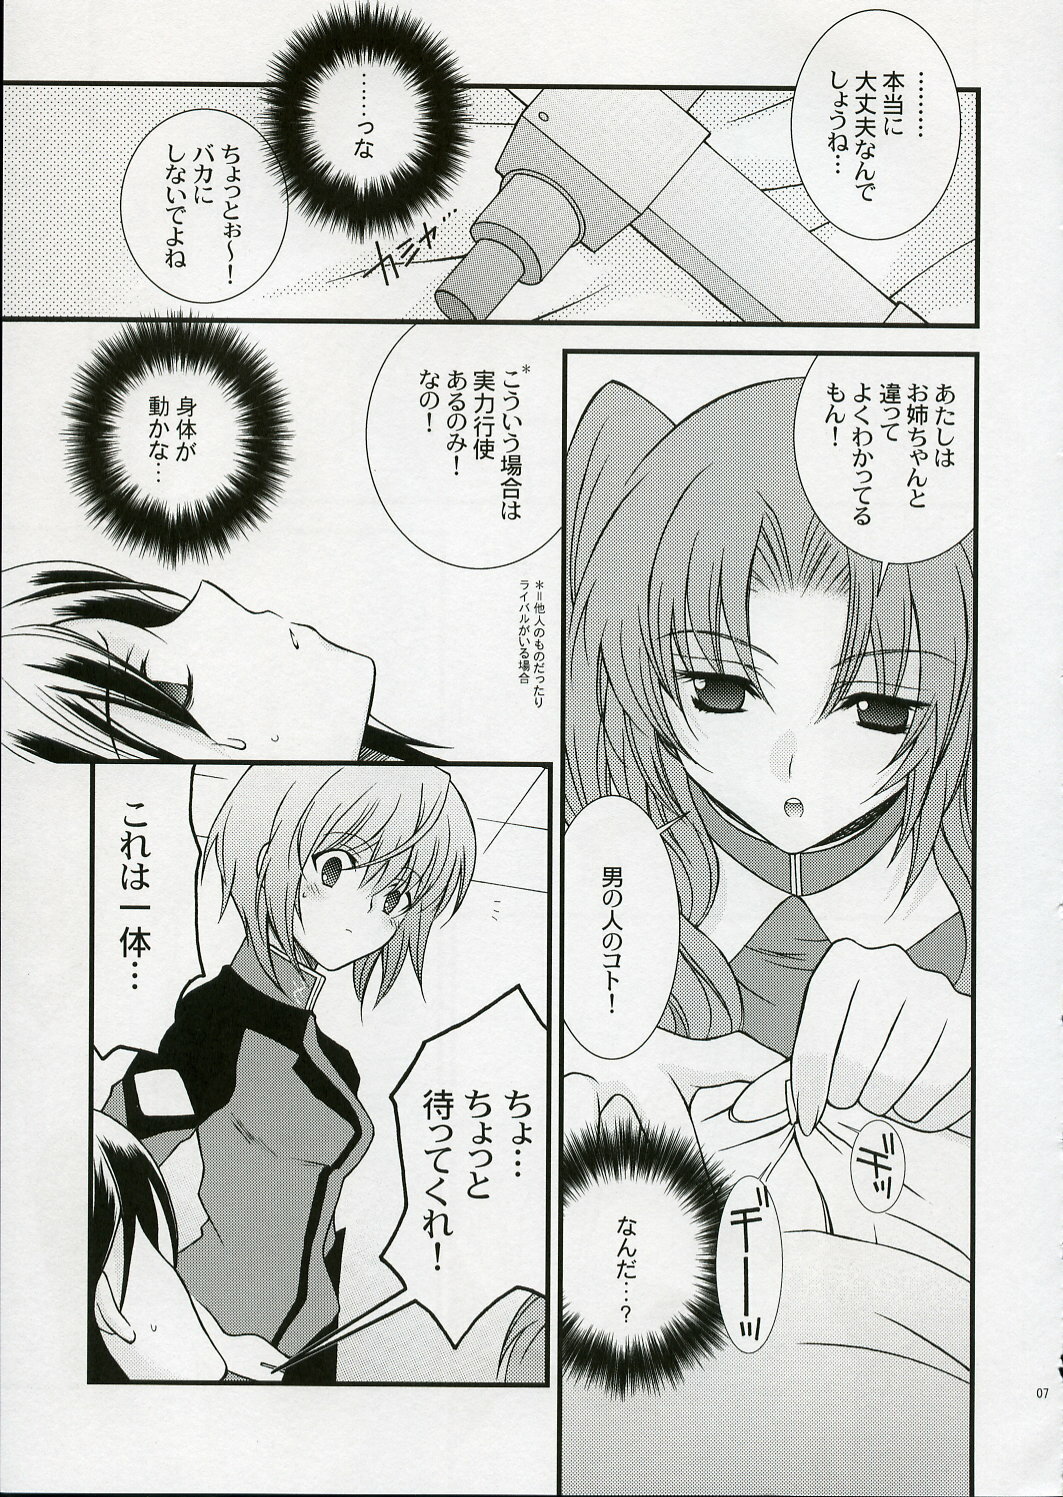 (SC28) [YLANG-YLANG (Ichie Ryouko)] RENDEZ-VOUS (Mobile Suit Gundam SEED DESTINY) page 6 full